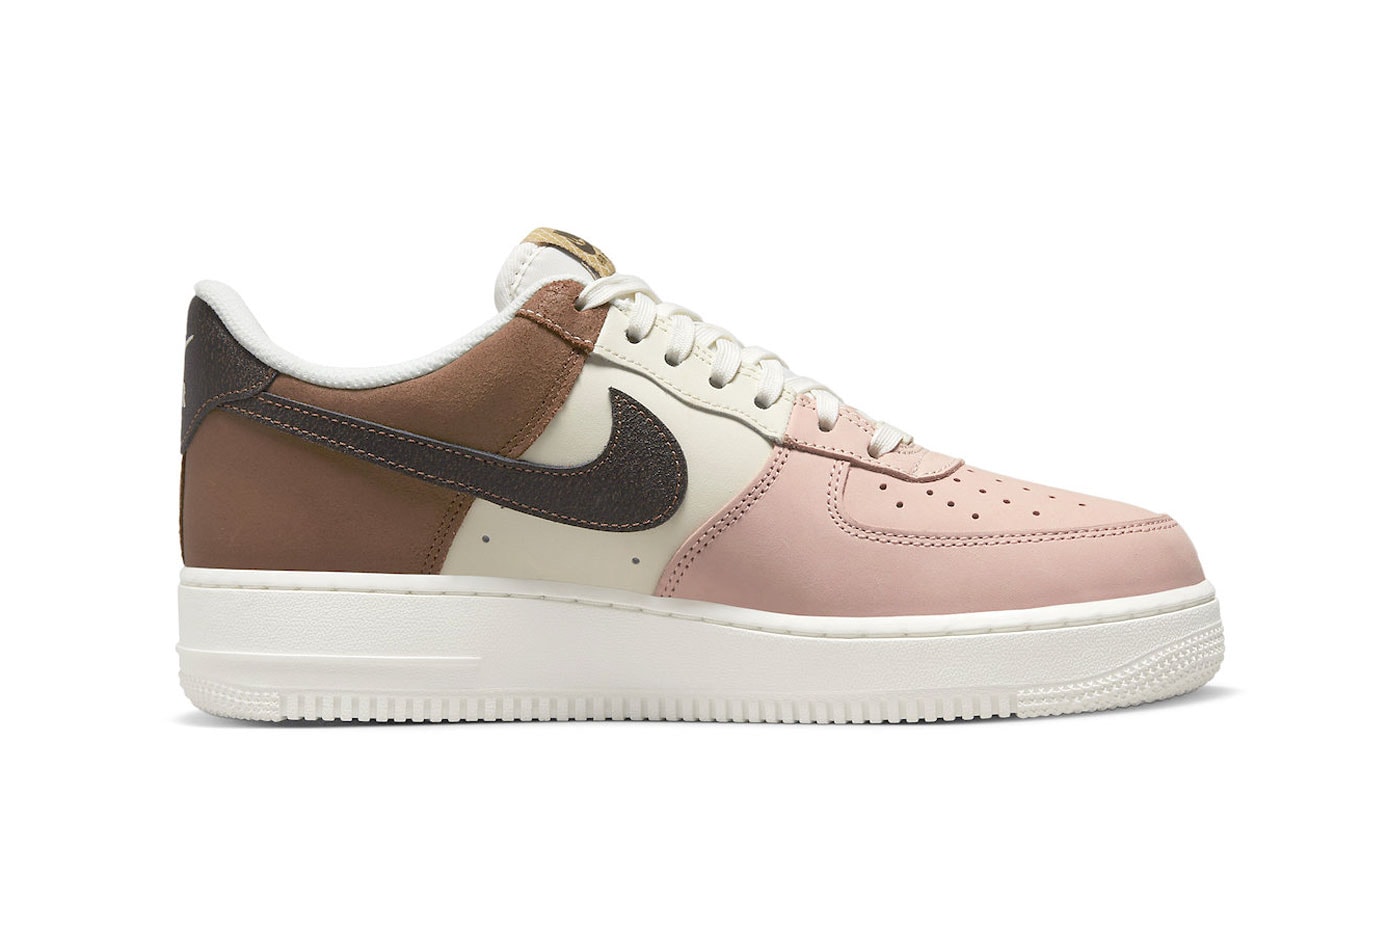 Nike Air Force 1 Low "Neopolitan" Takes Summer Treats to a Whole New Level ice cream chocolate vanilla strawberry summer-ready shoes